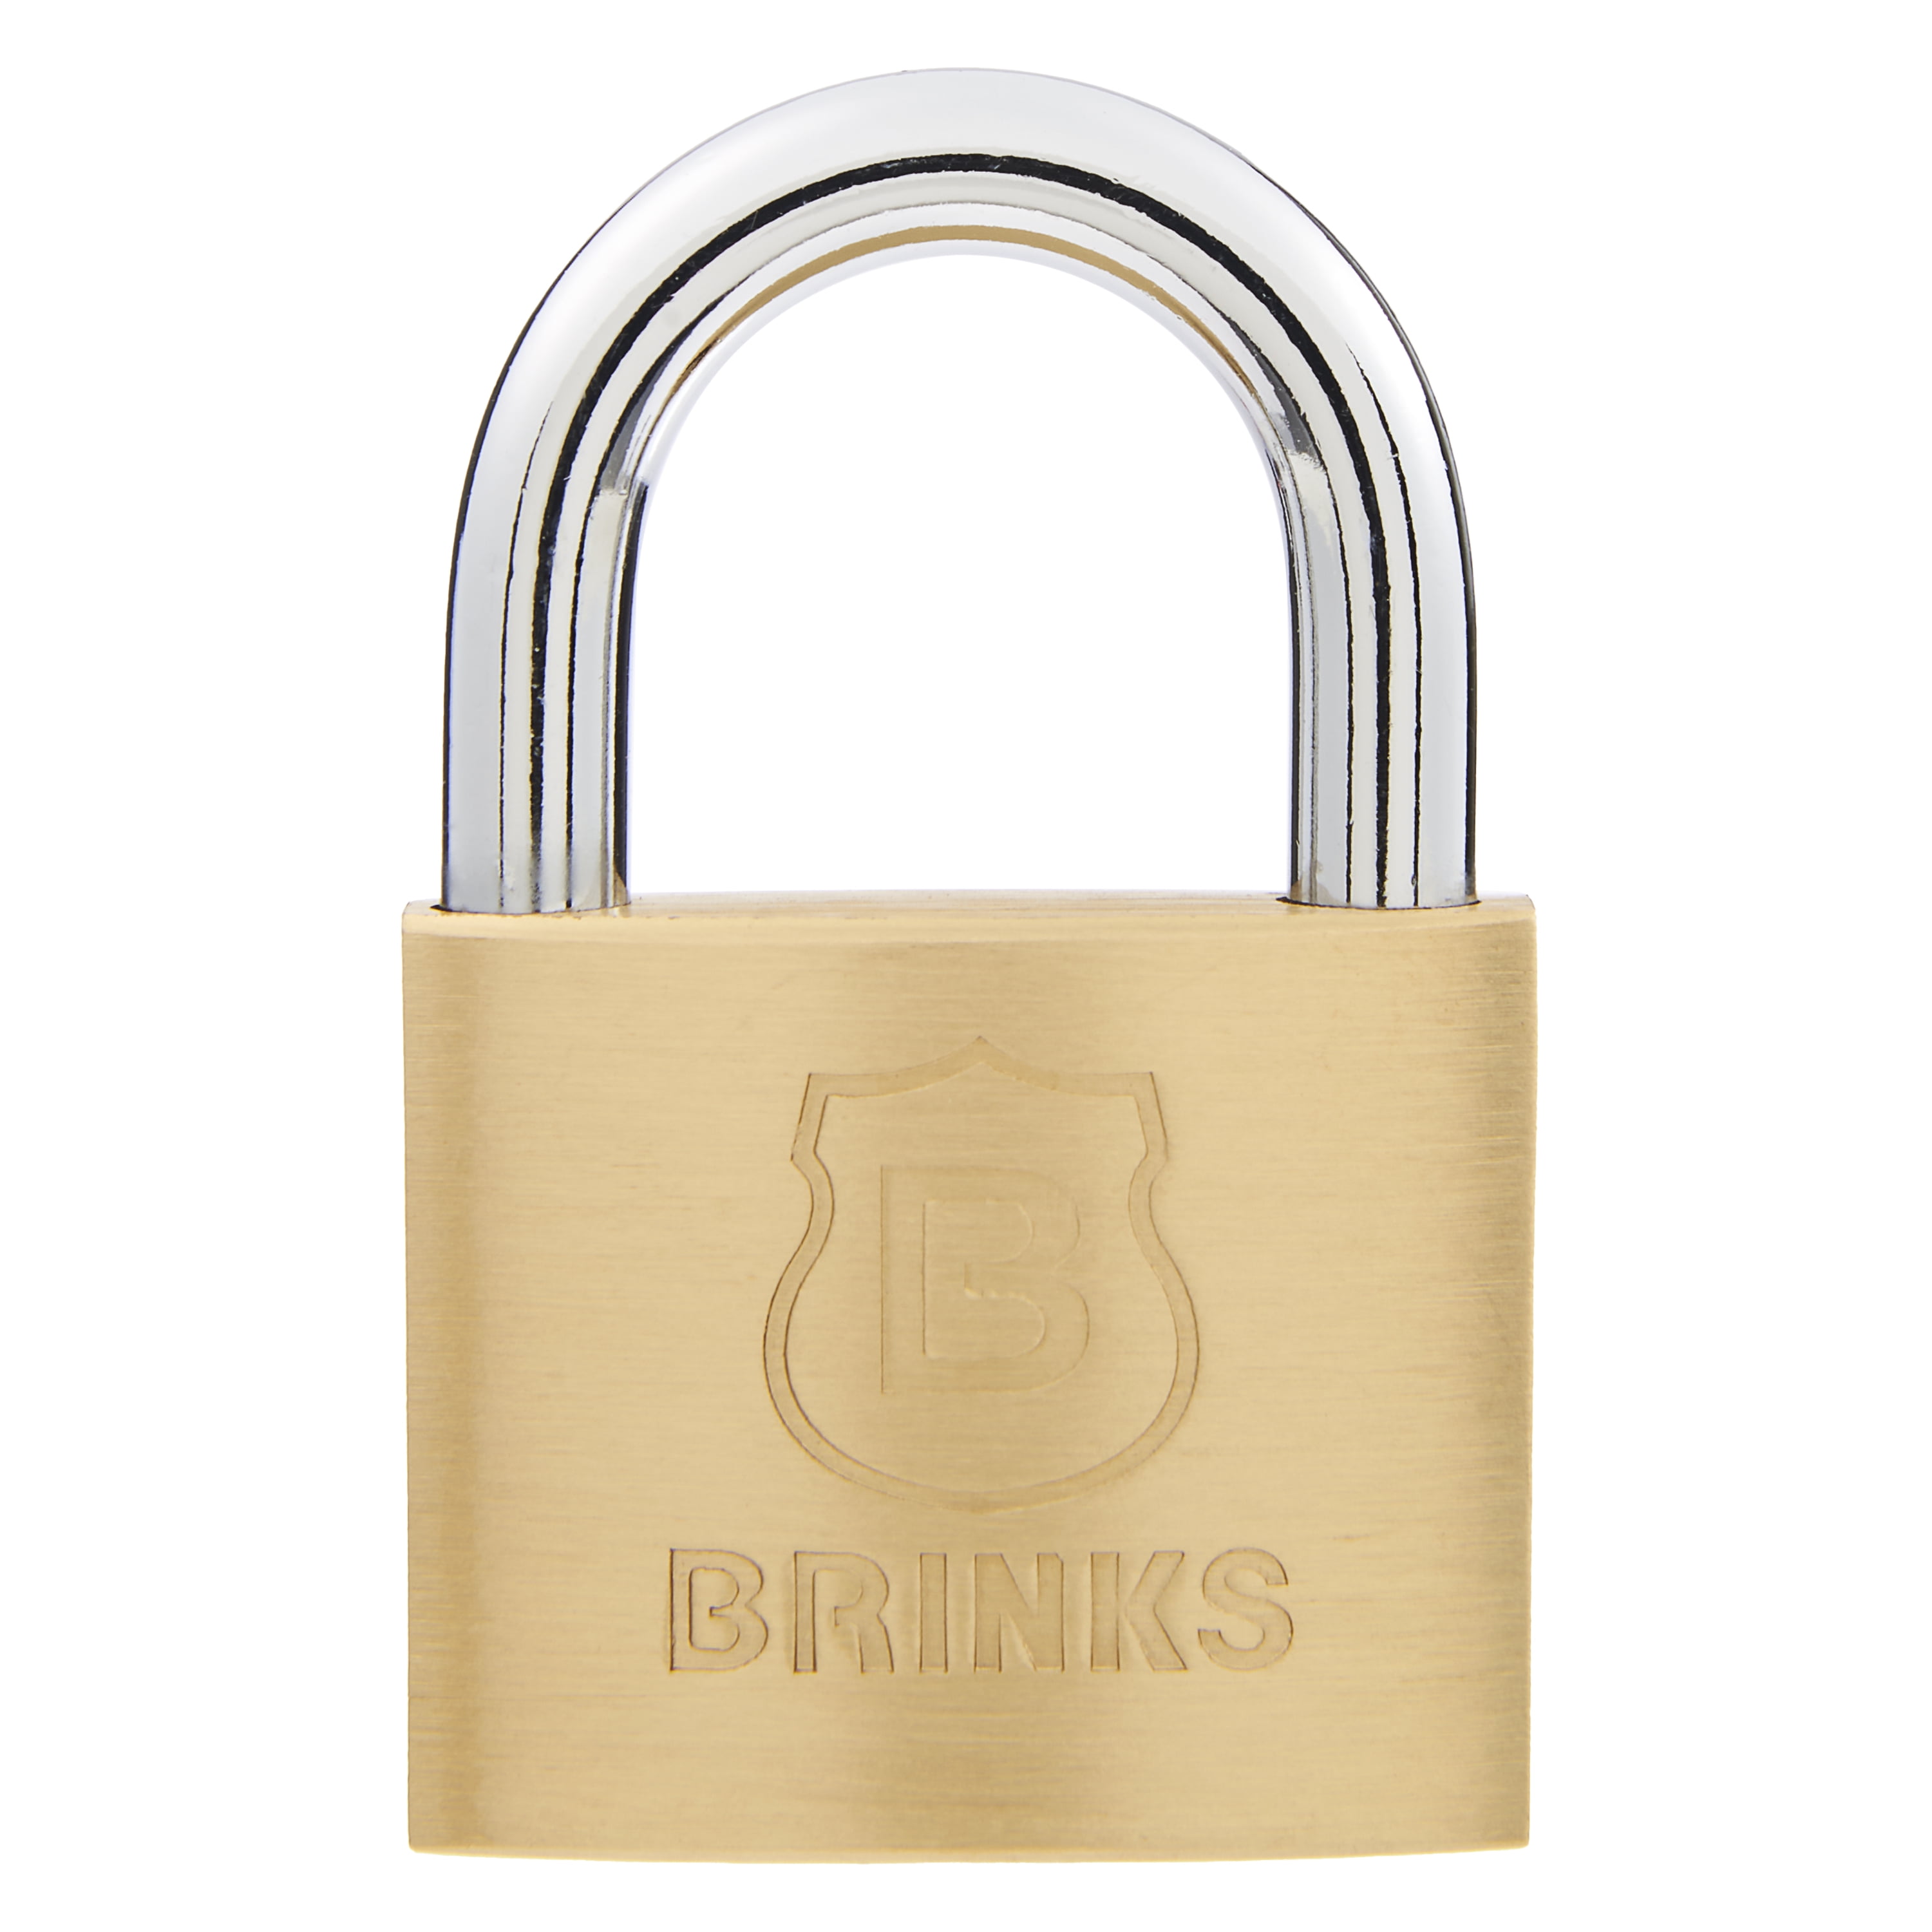 Master Lock 140Q Solid Brass Keyed Alike Padlock with 1-9/16-inch Wide Body and 